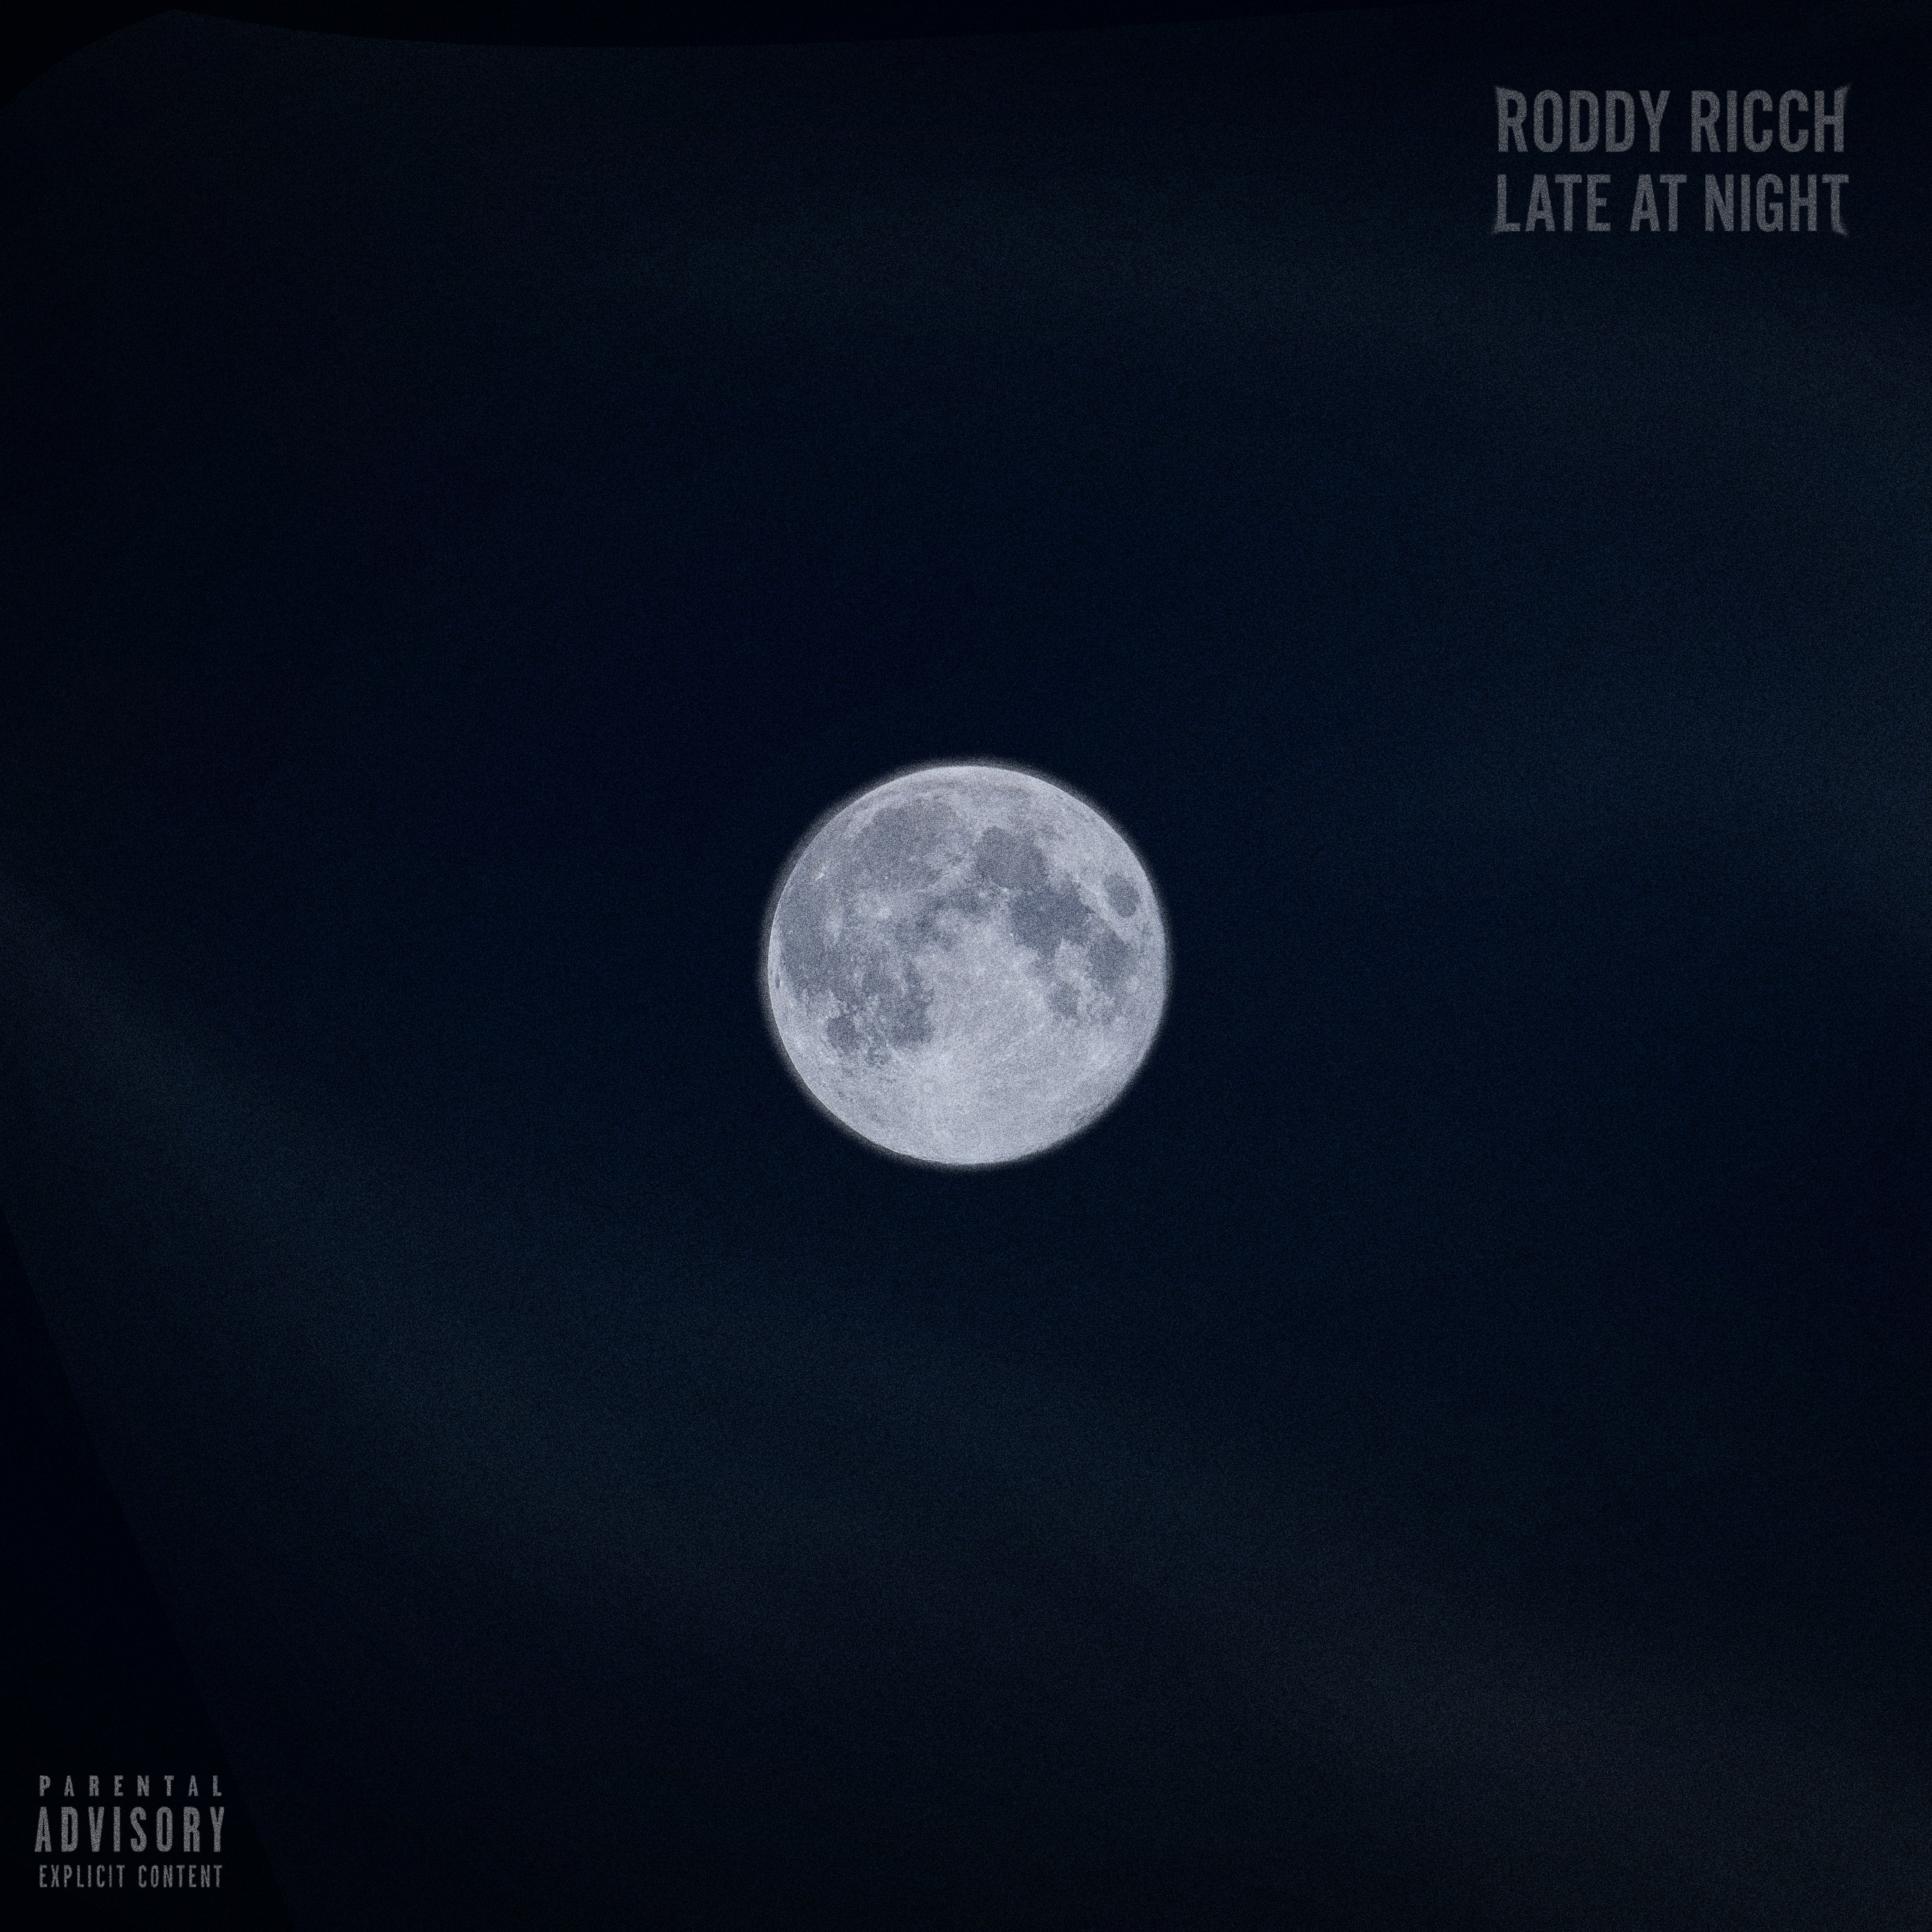 roddy rich late at night cover art